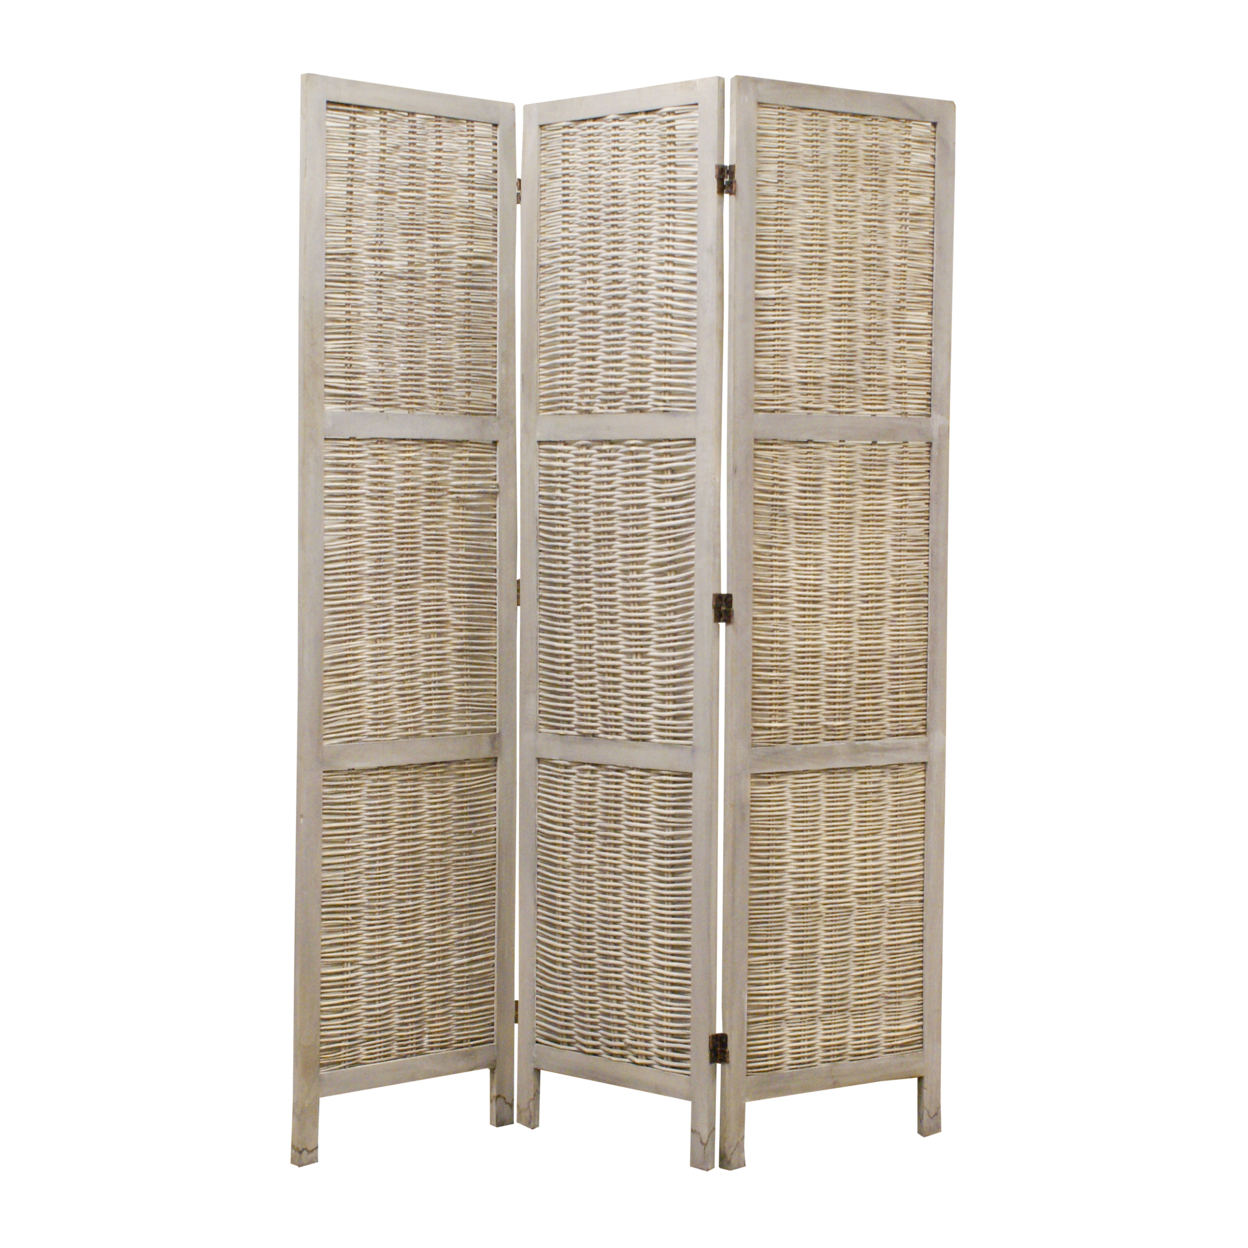 Cottage Style 3 Panel Room Divider With Willow Weaving, Gray- Saltoro Sherpi